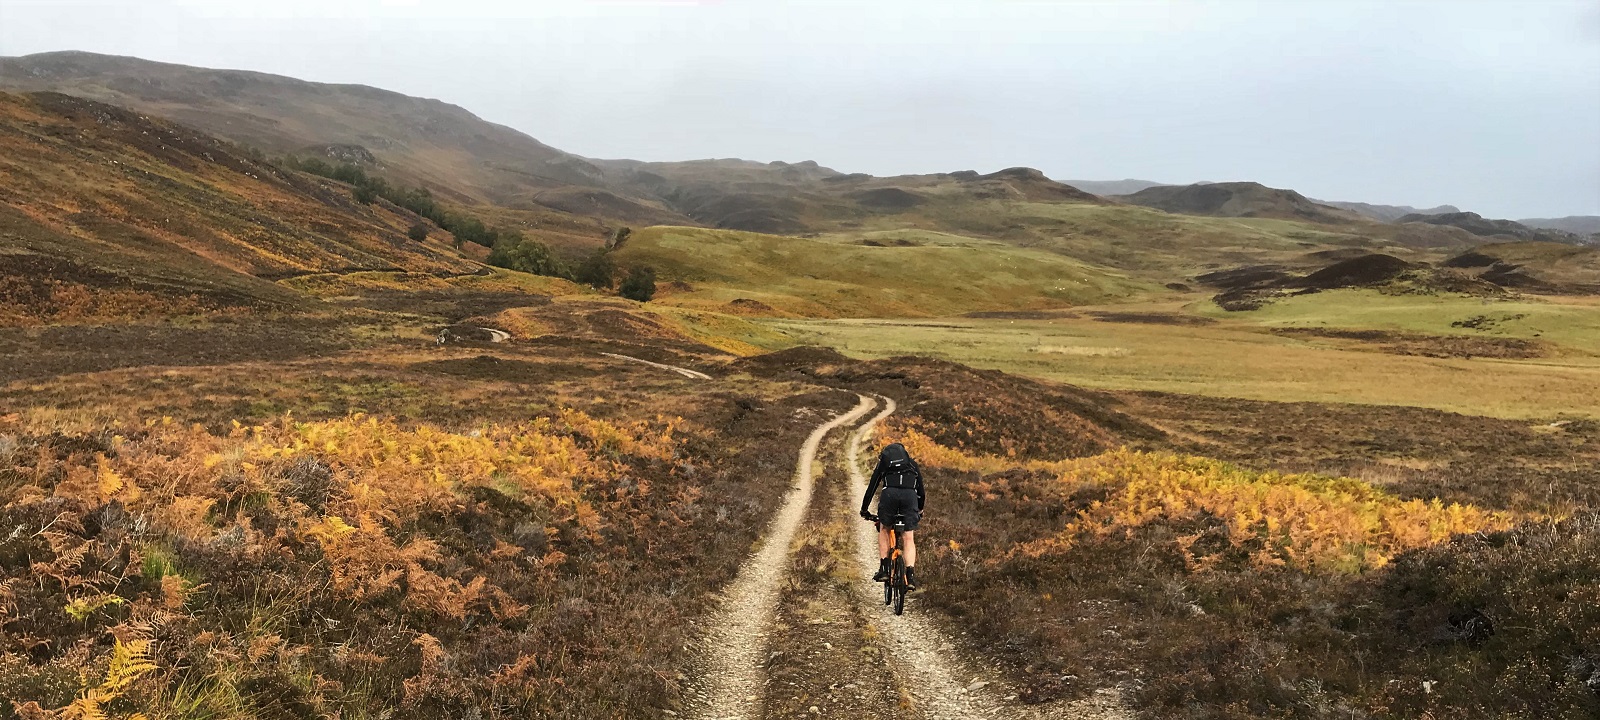 Photos from our Remote Highlands Cycling Holiday